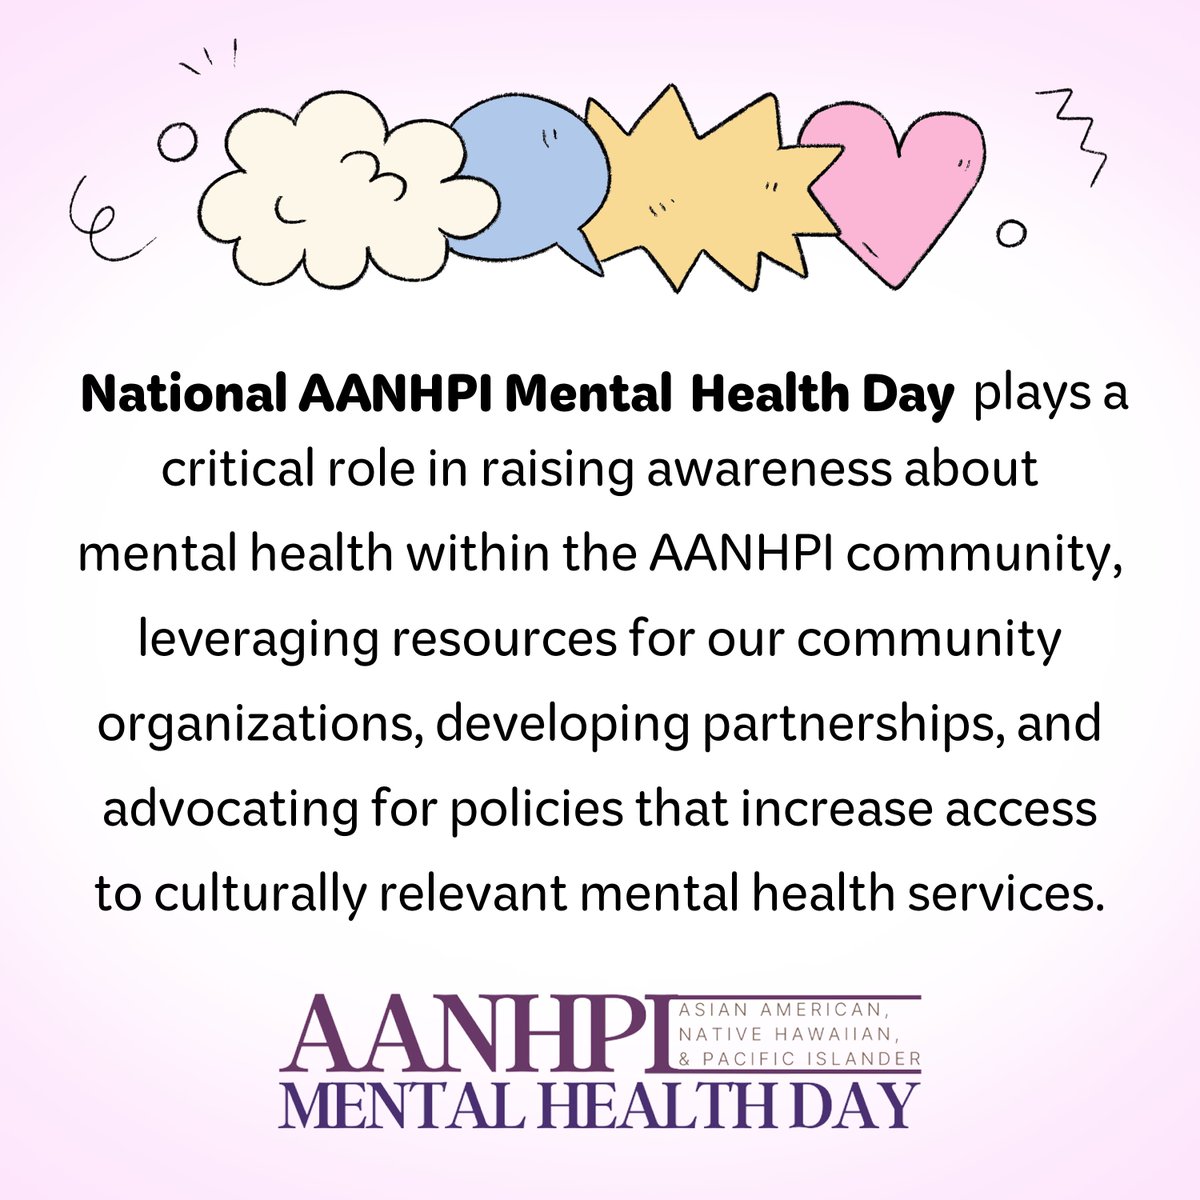 Proud to be a community partner of @NAAPIMHA’s 4th Annual National #AANHPIMentalHealthDay celebration! We stand strongly in solidarity with our communities around destigmatizing AANHPI mental health and promoting the well-being of AANHPIs buff.ly/4bhOvfN